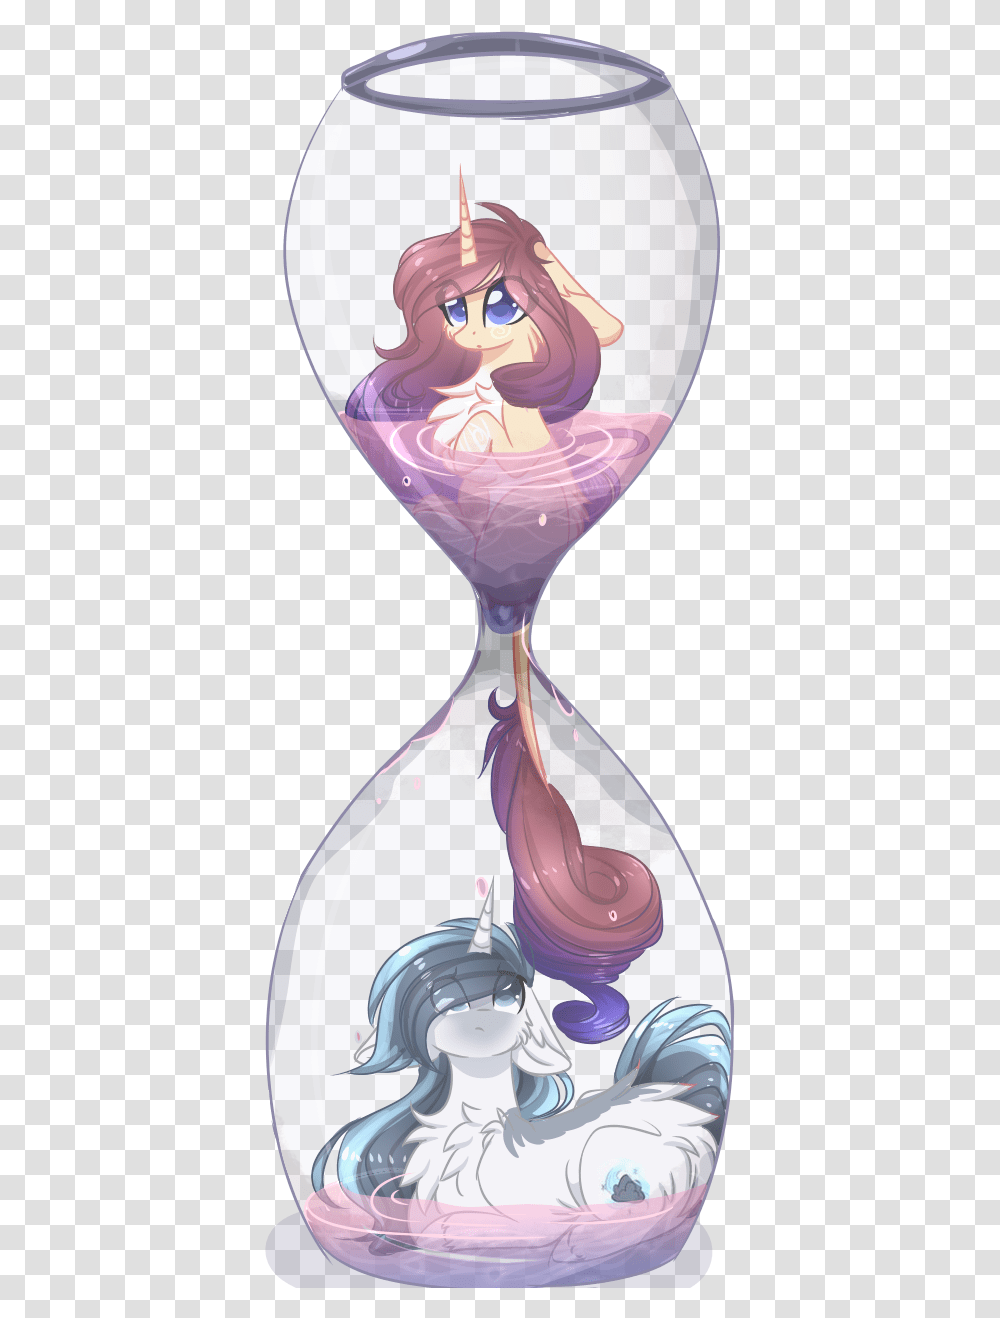 Cracked Drawing Hourglass Hourglass Oc Transparent Png